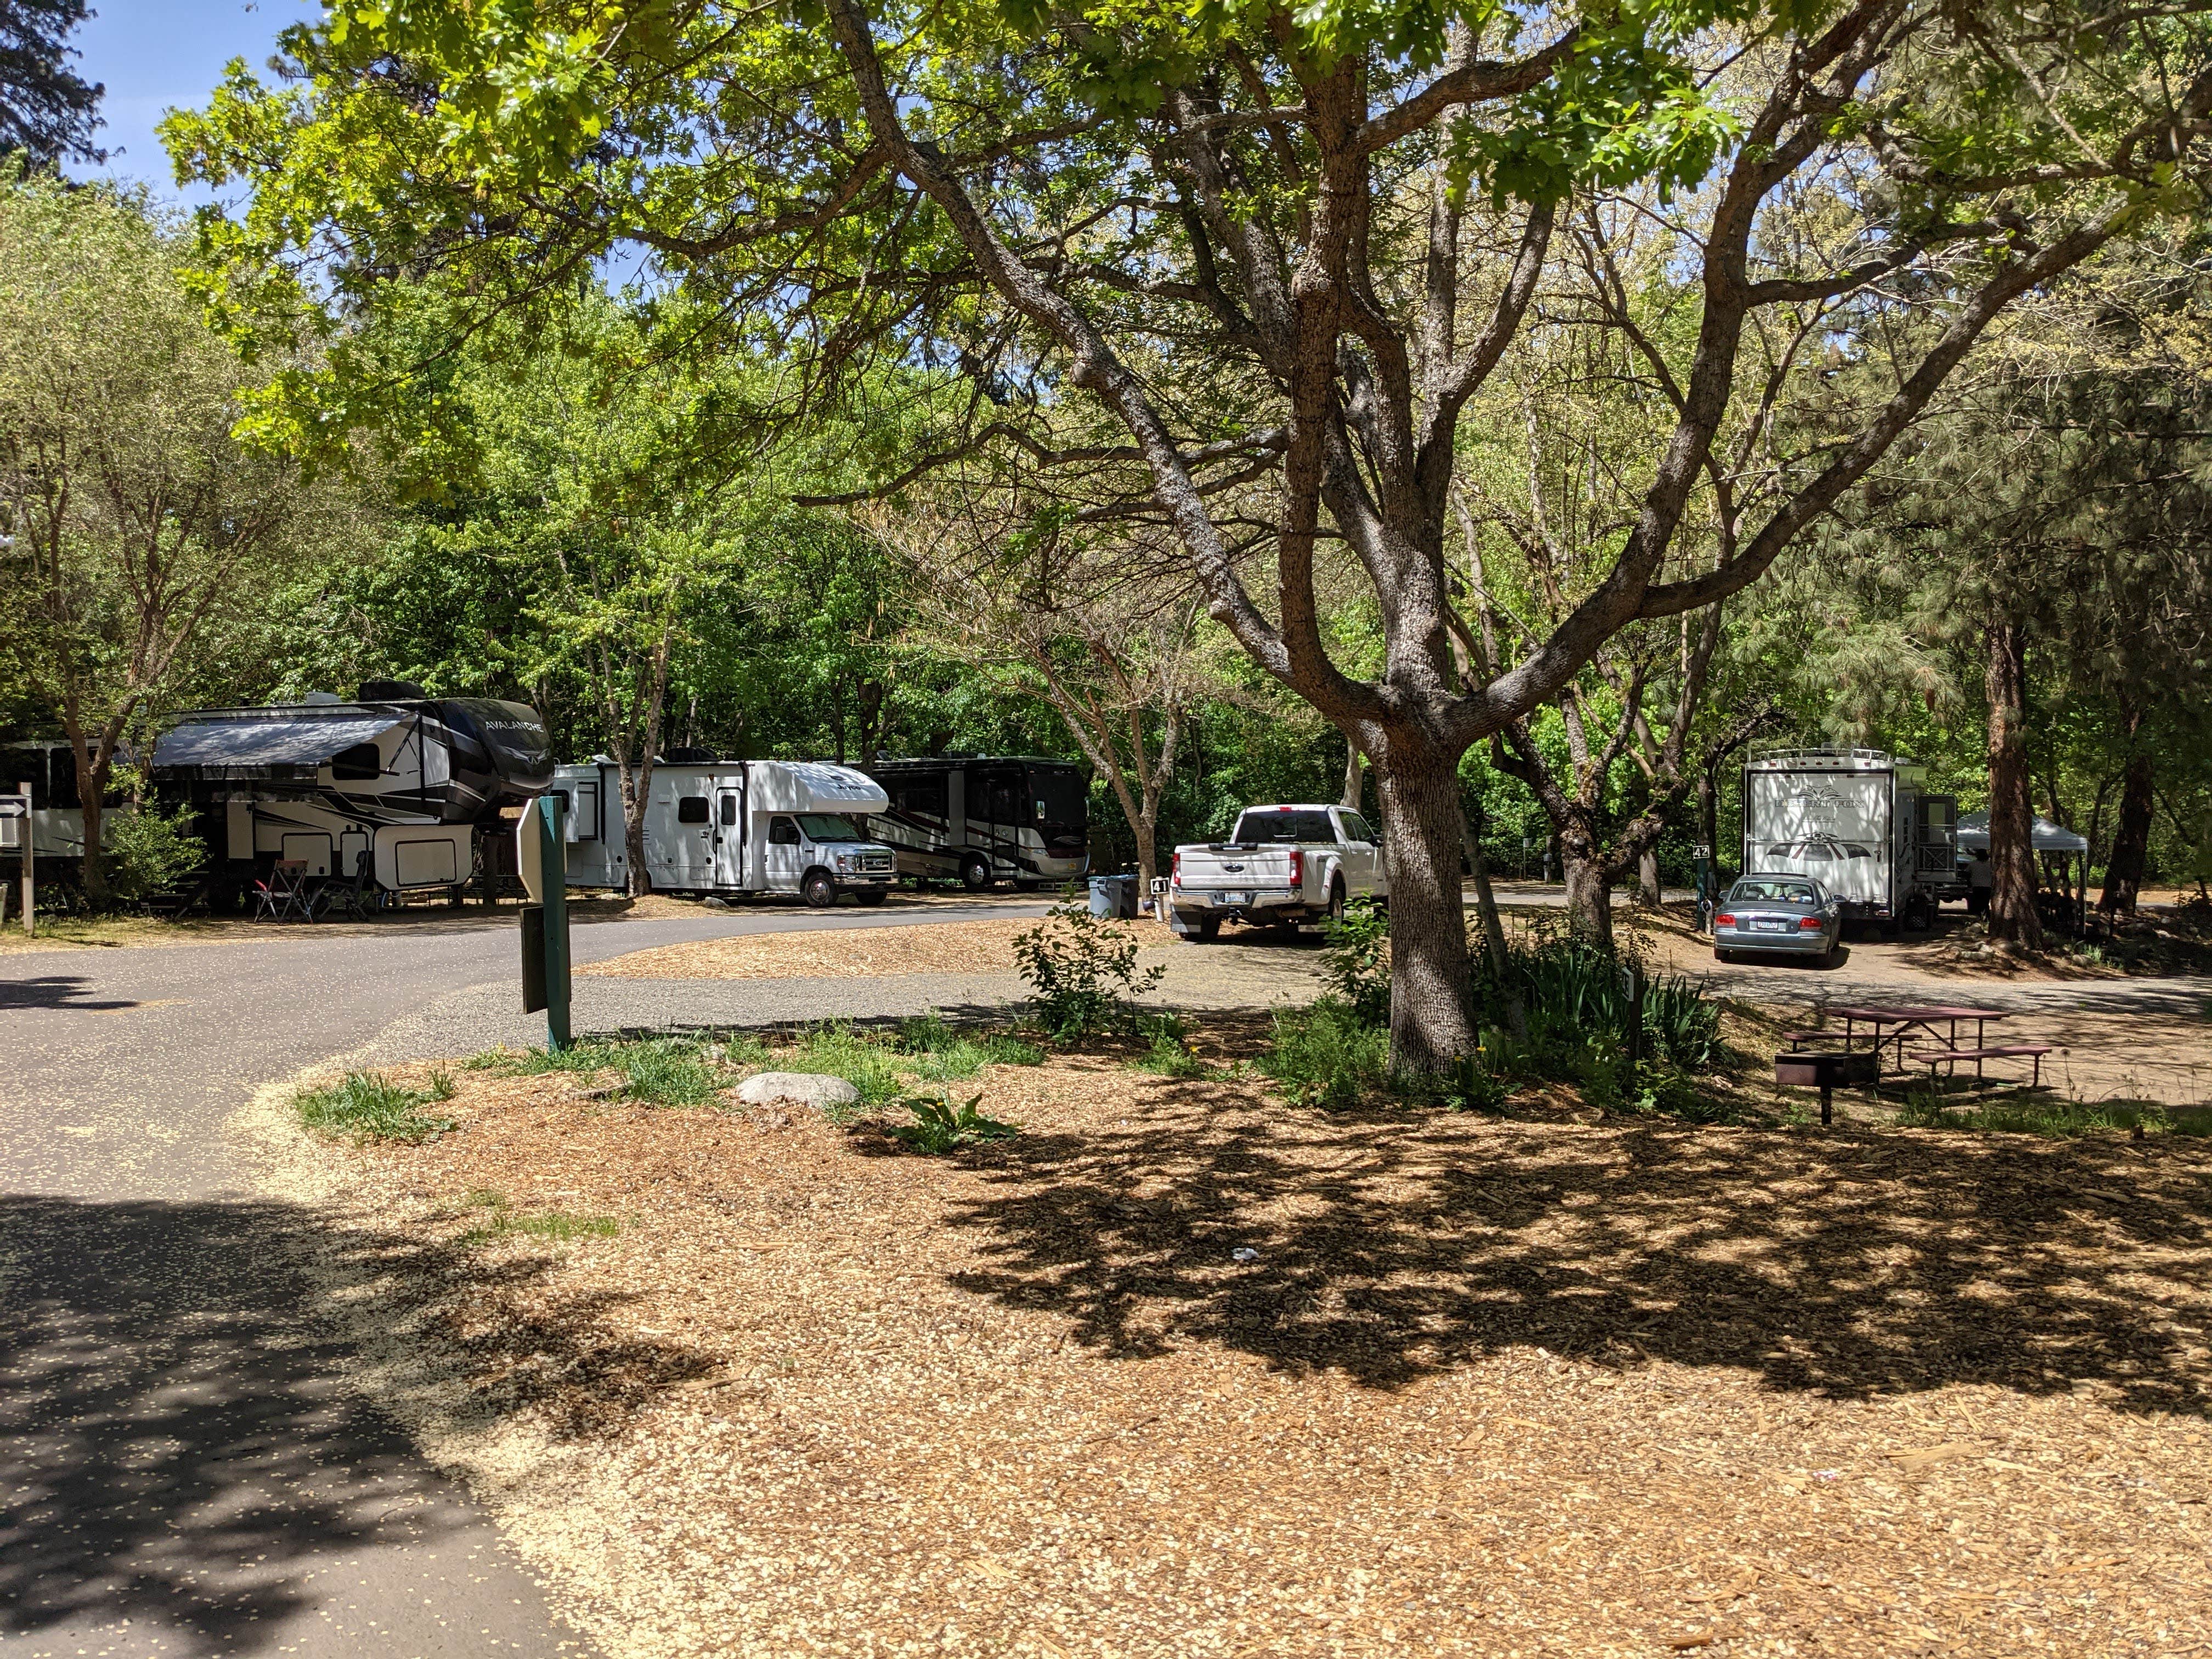 Using Solar Energy to Power Your Camping  Ashland's Creekside Campground &  RV Park